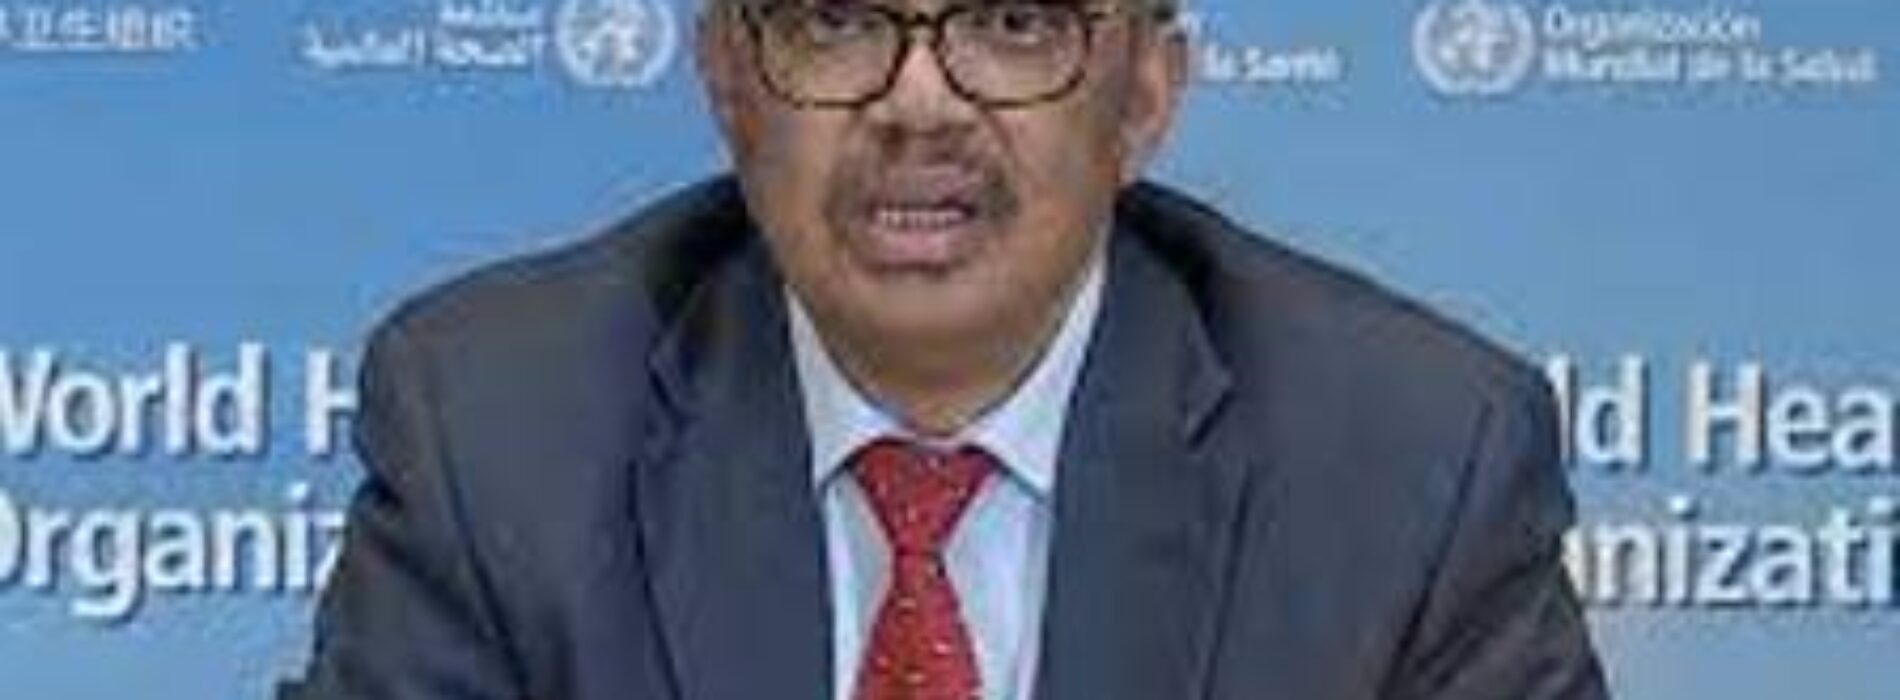 World Health Assembly re-elects Tedros Ghebreyesus as WHO DG